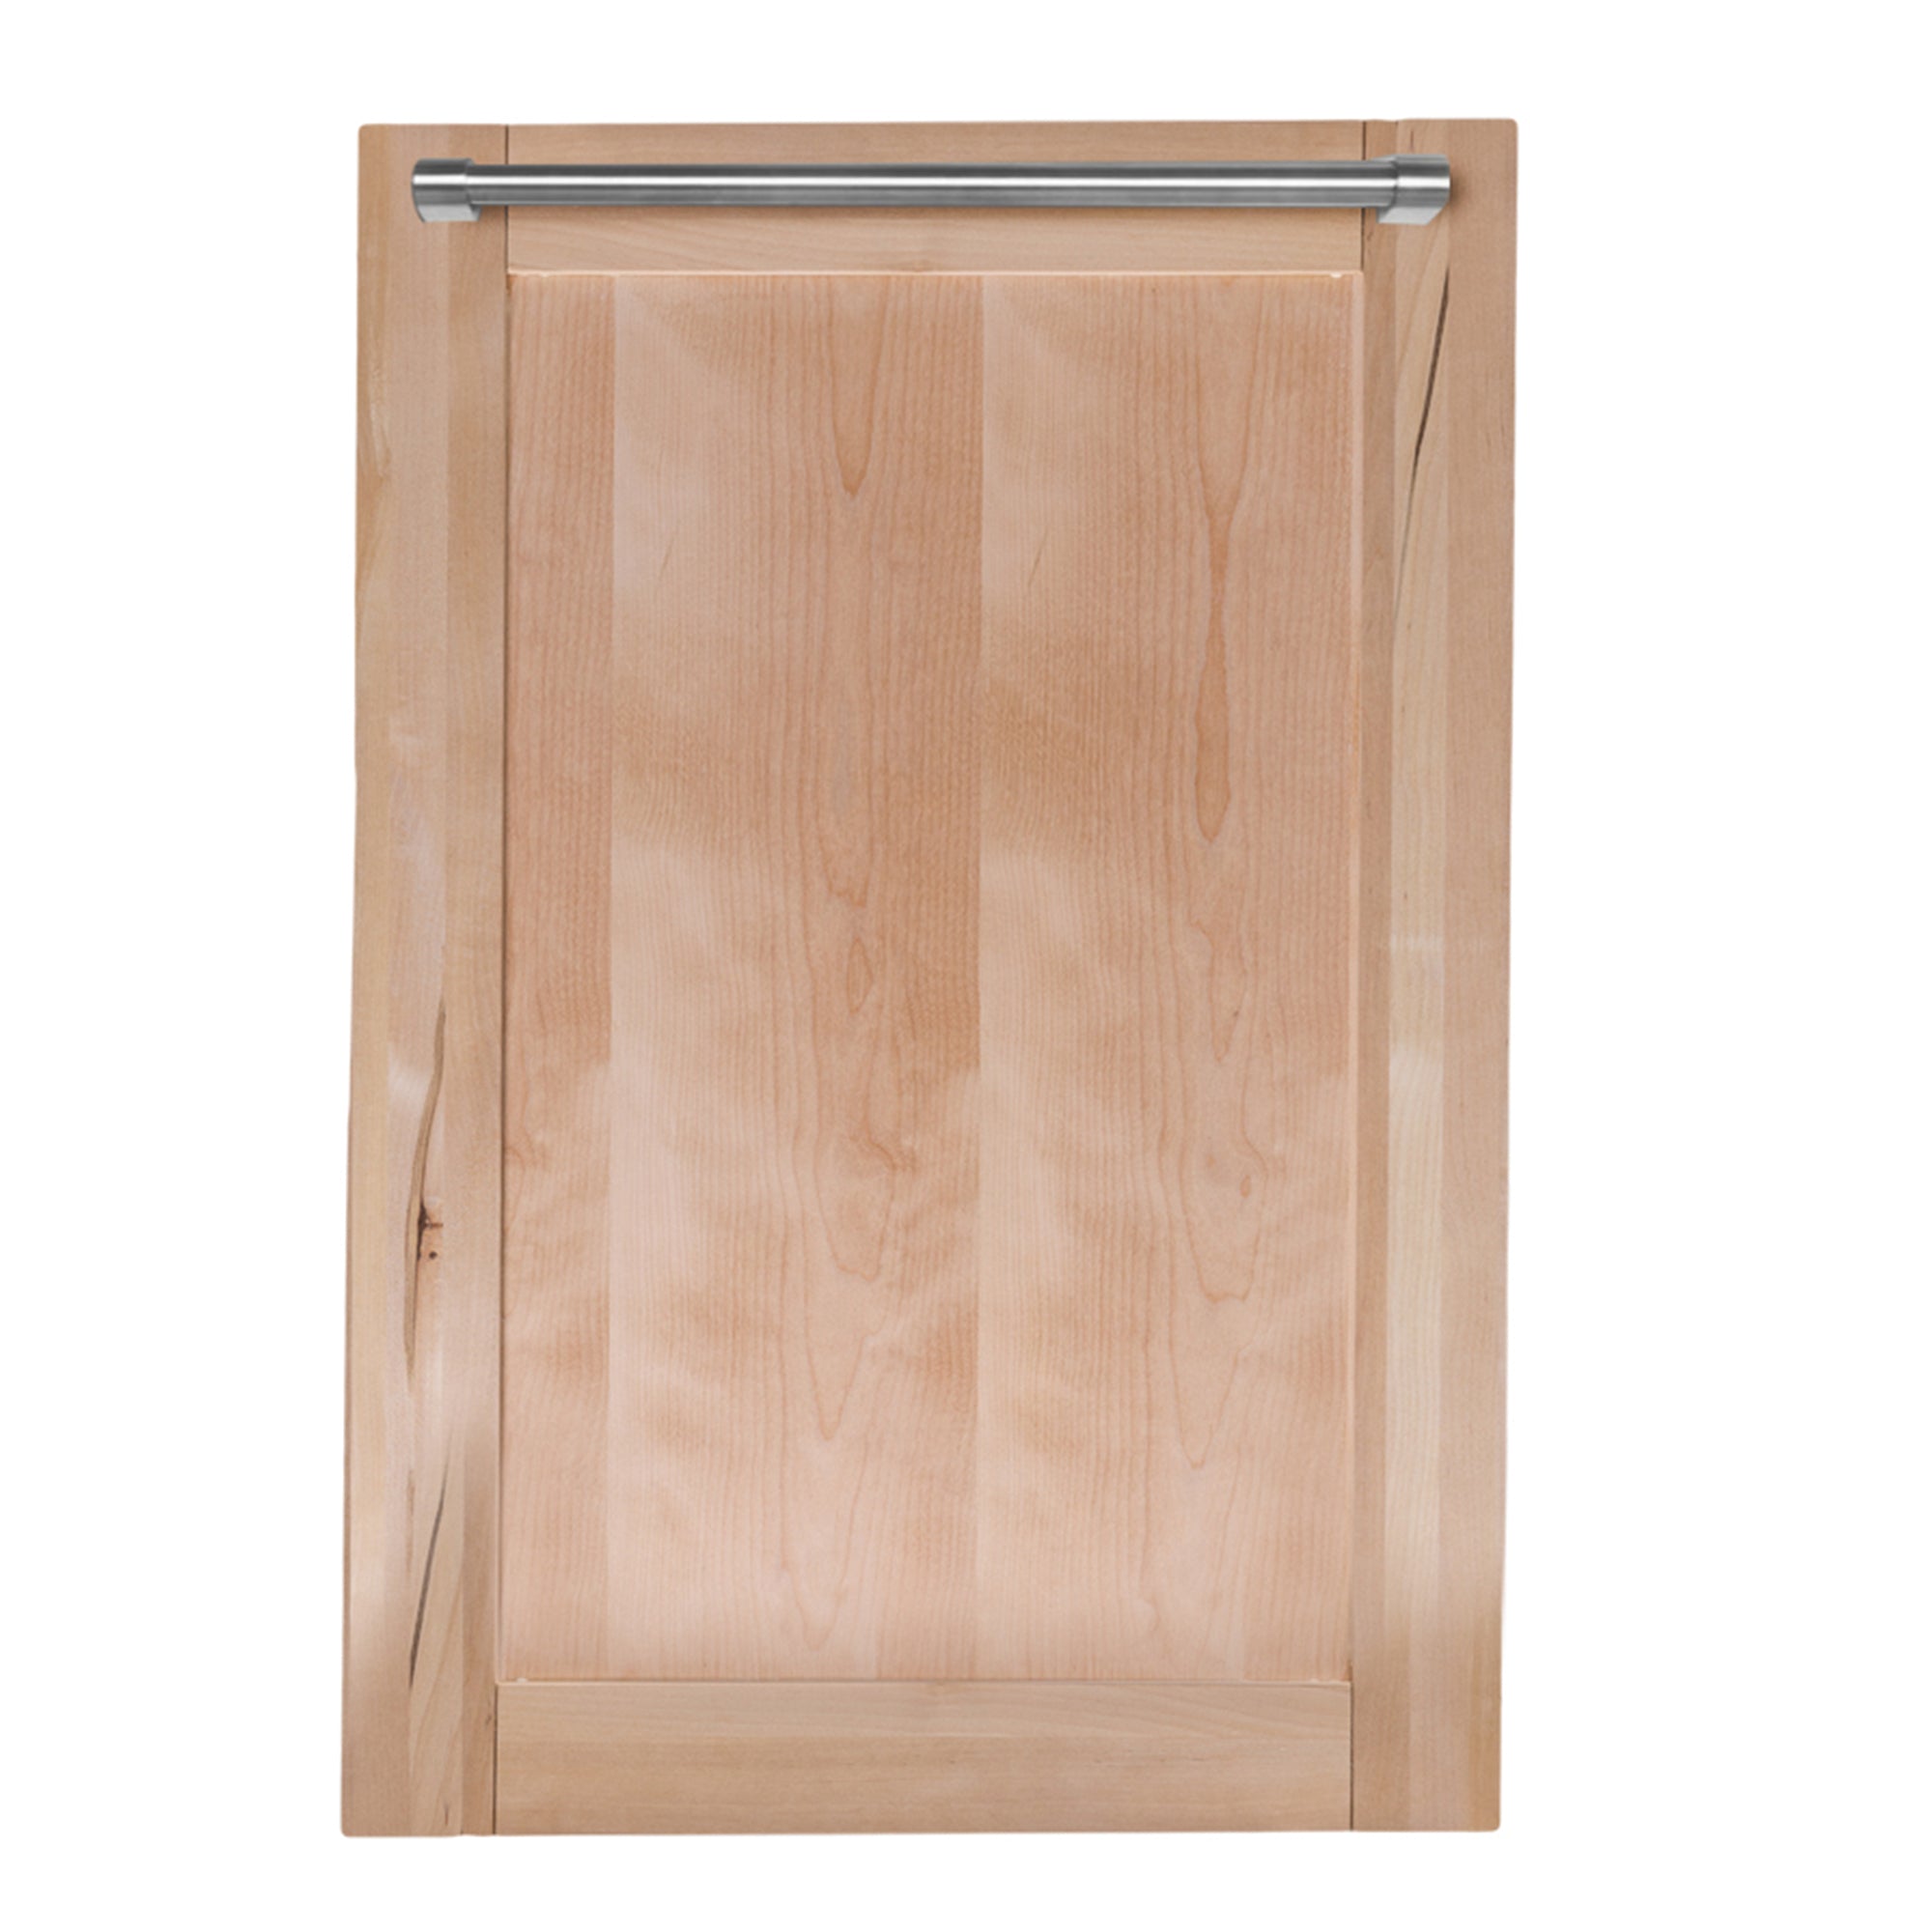 18 Dishwasher Panel in Unfinished Wood with Modern and Traditional Handle (DP-UF-H-18)